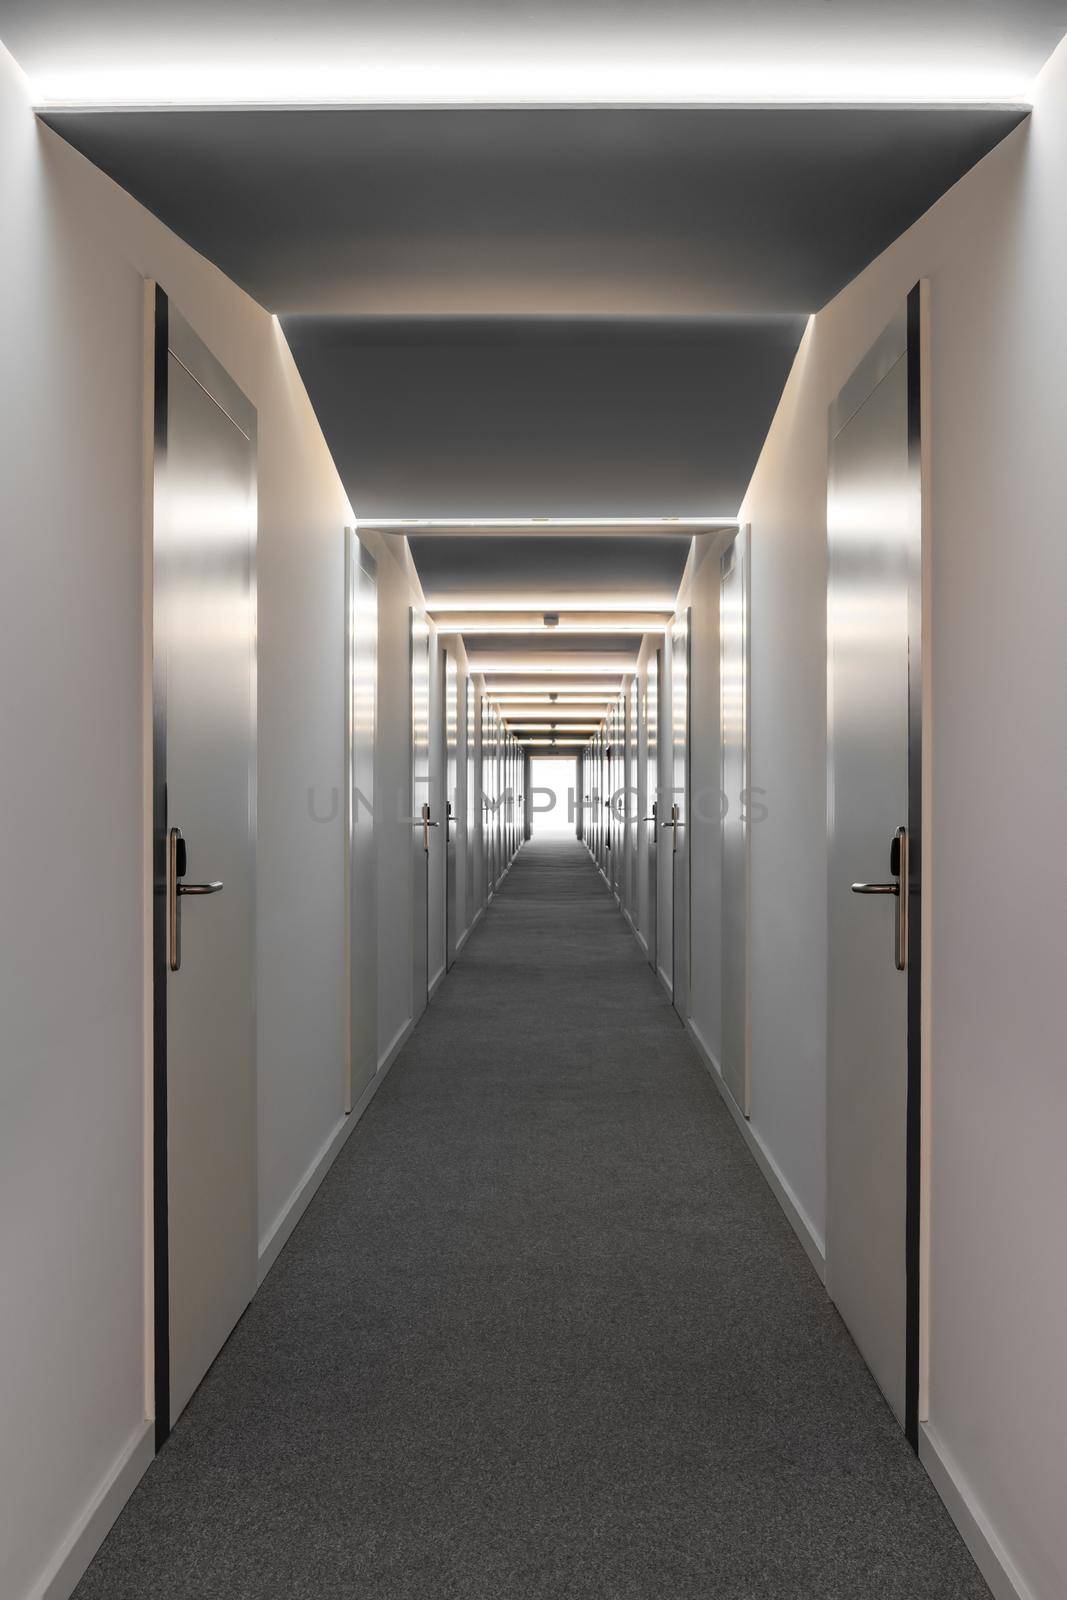 Long corridor in an office or hotel with room doors from both sides.